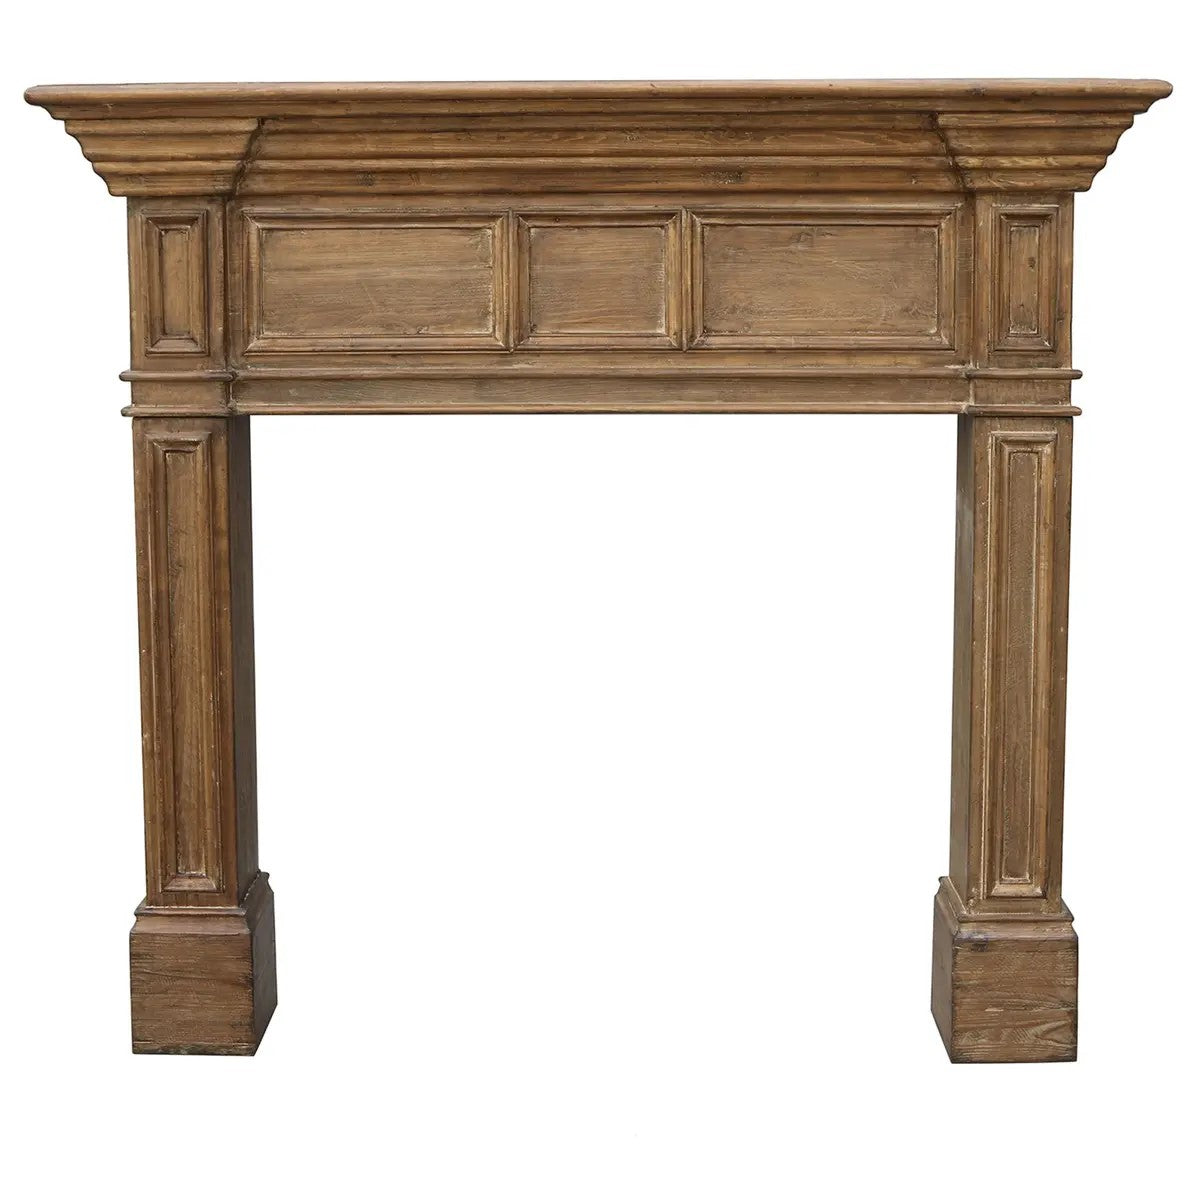 Reclaimed Wood Fireplace Mantels for sale, Wooden Vintage Fireplace Mantels for sale